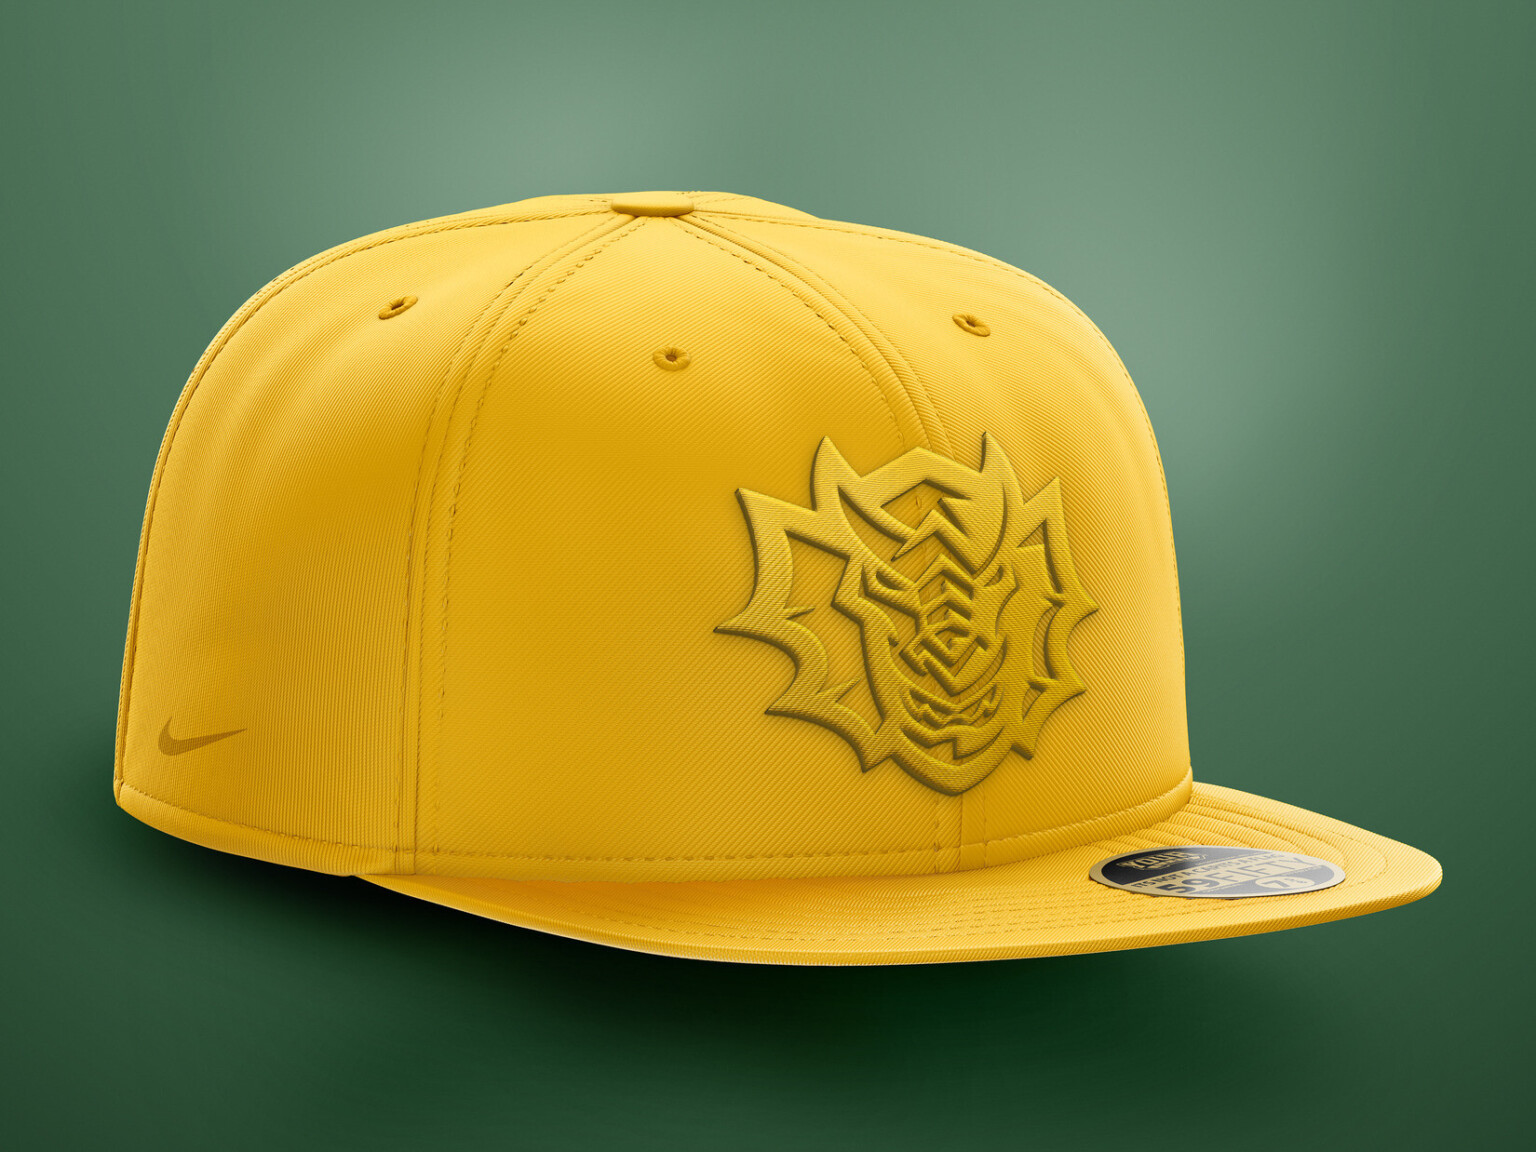 Yellow baseball cap with embroidered dragon logo